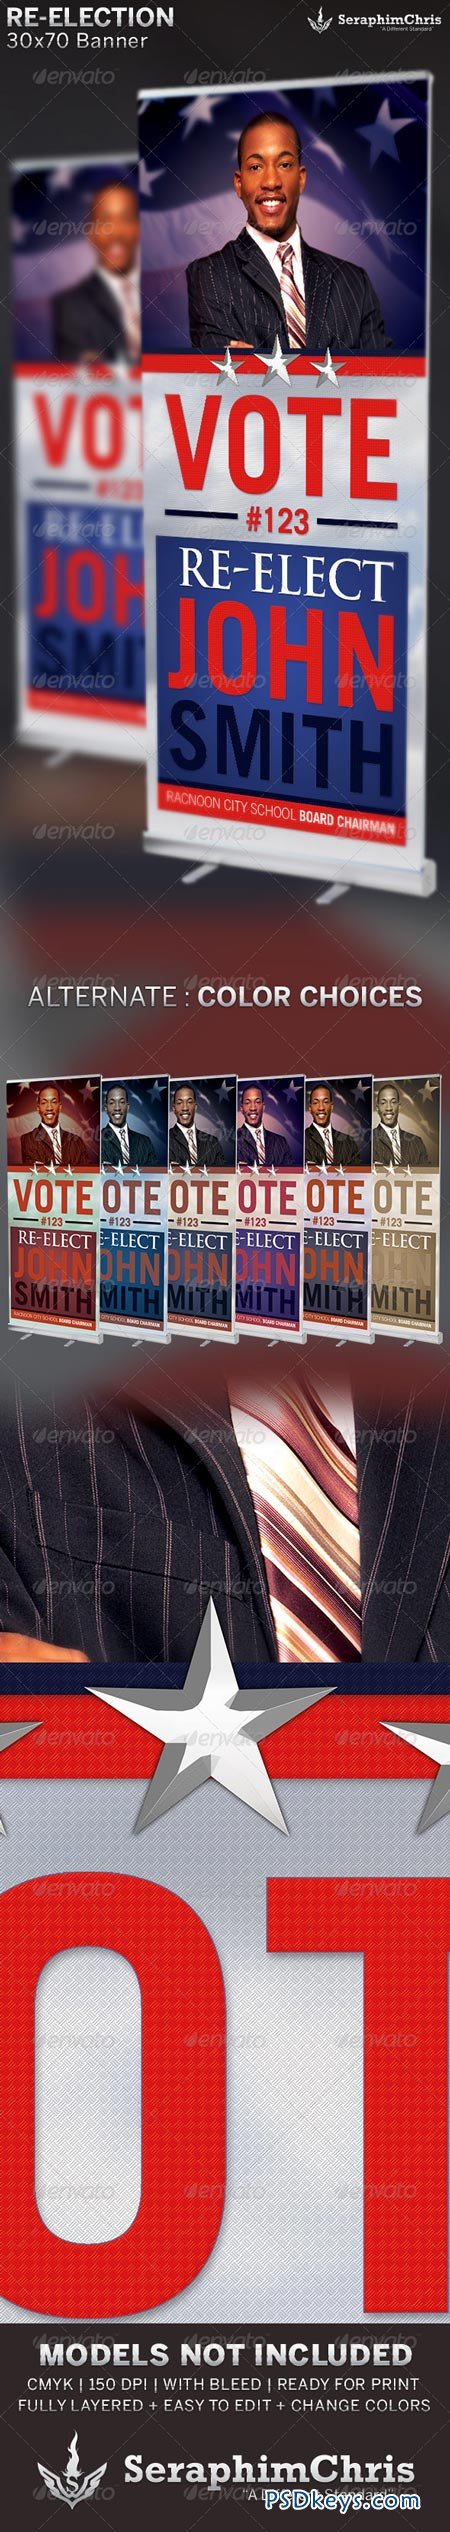 Re-Election Banner Template 6603620